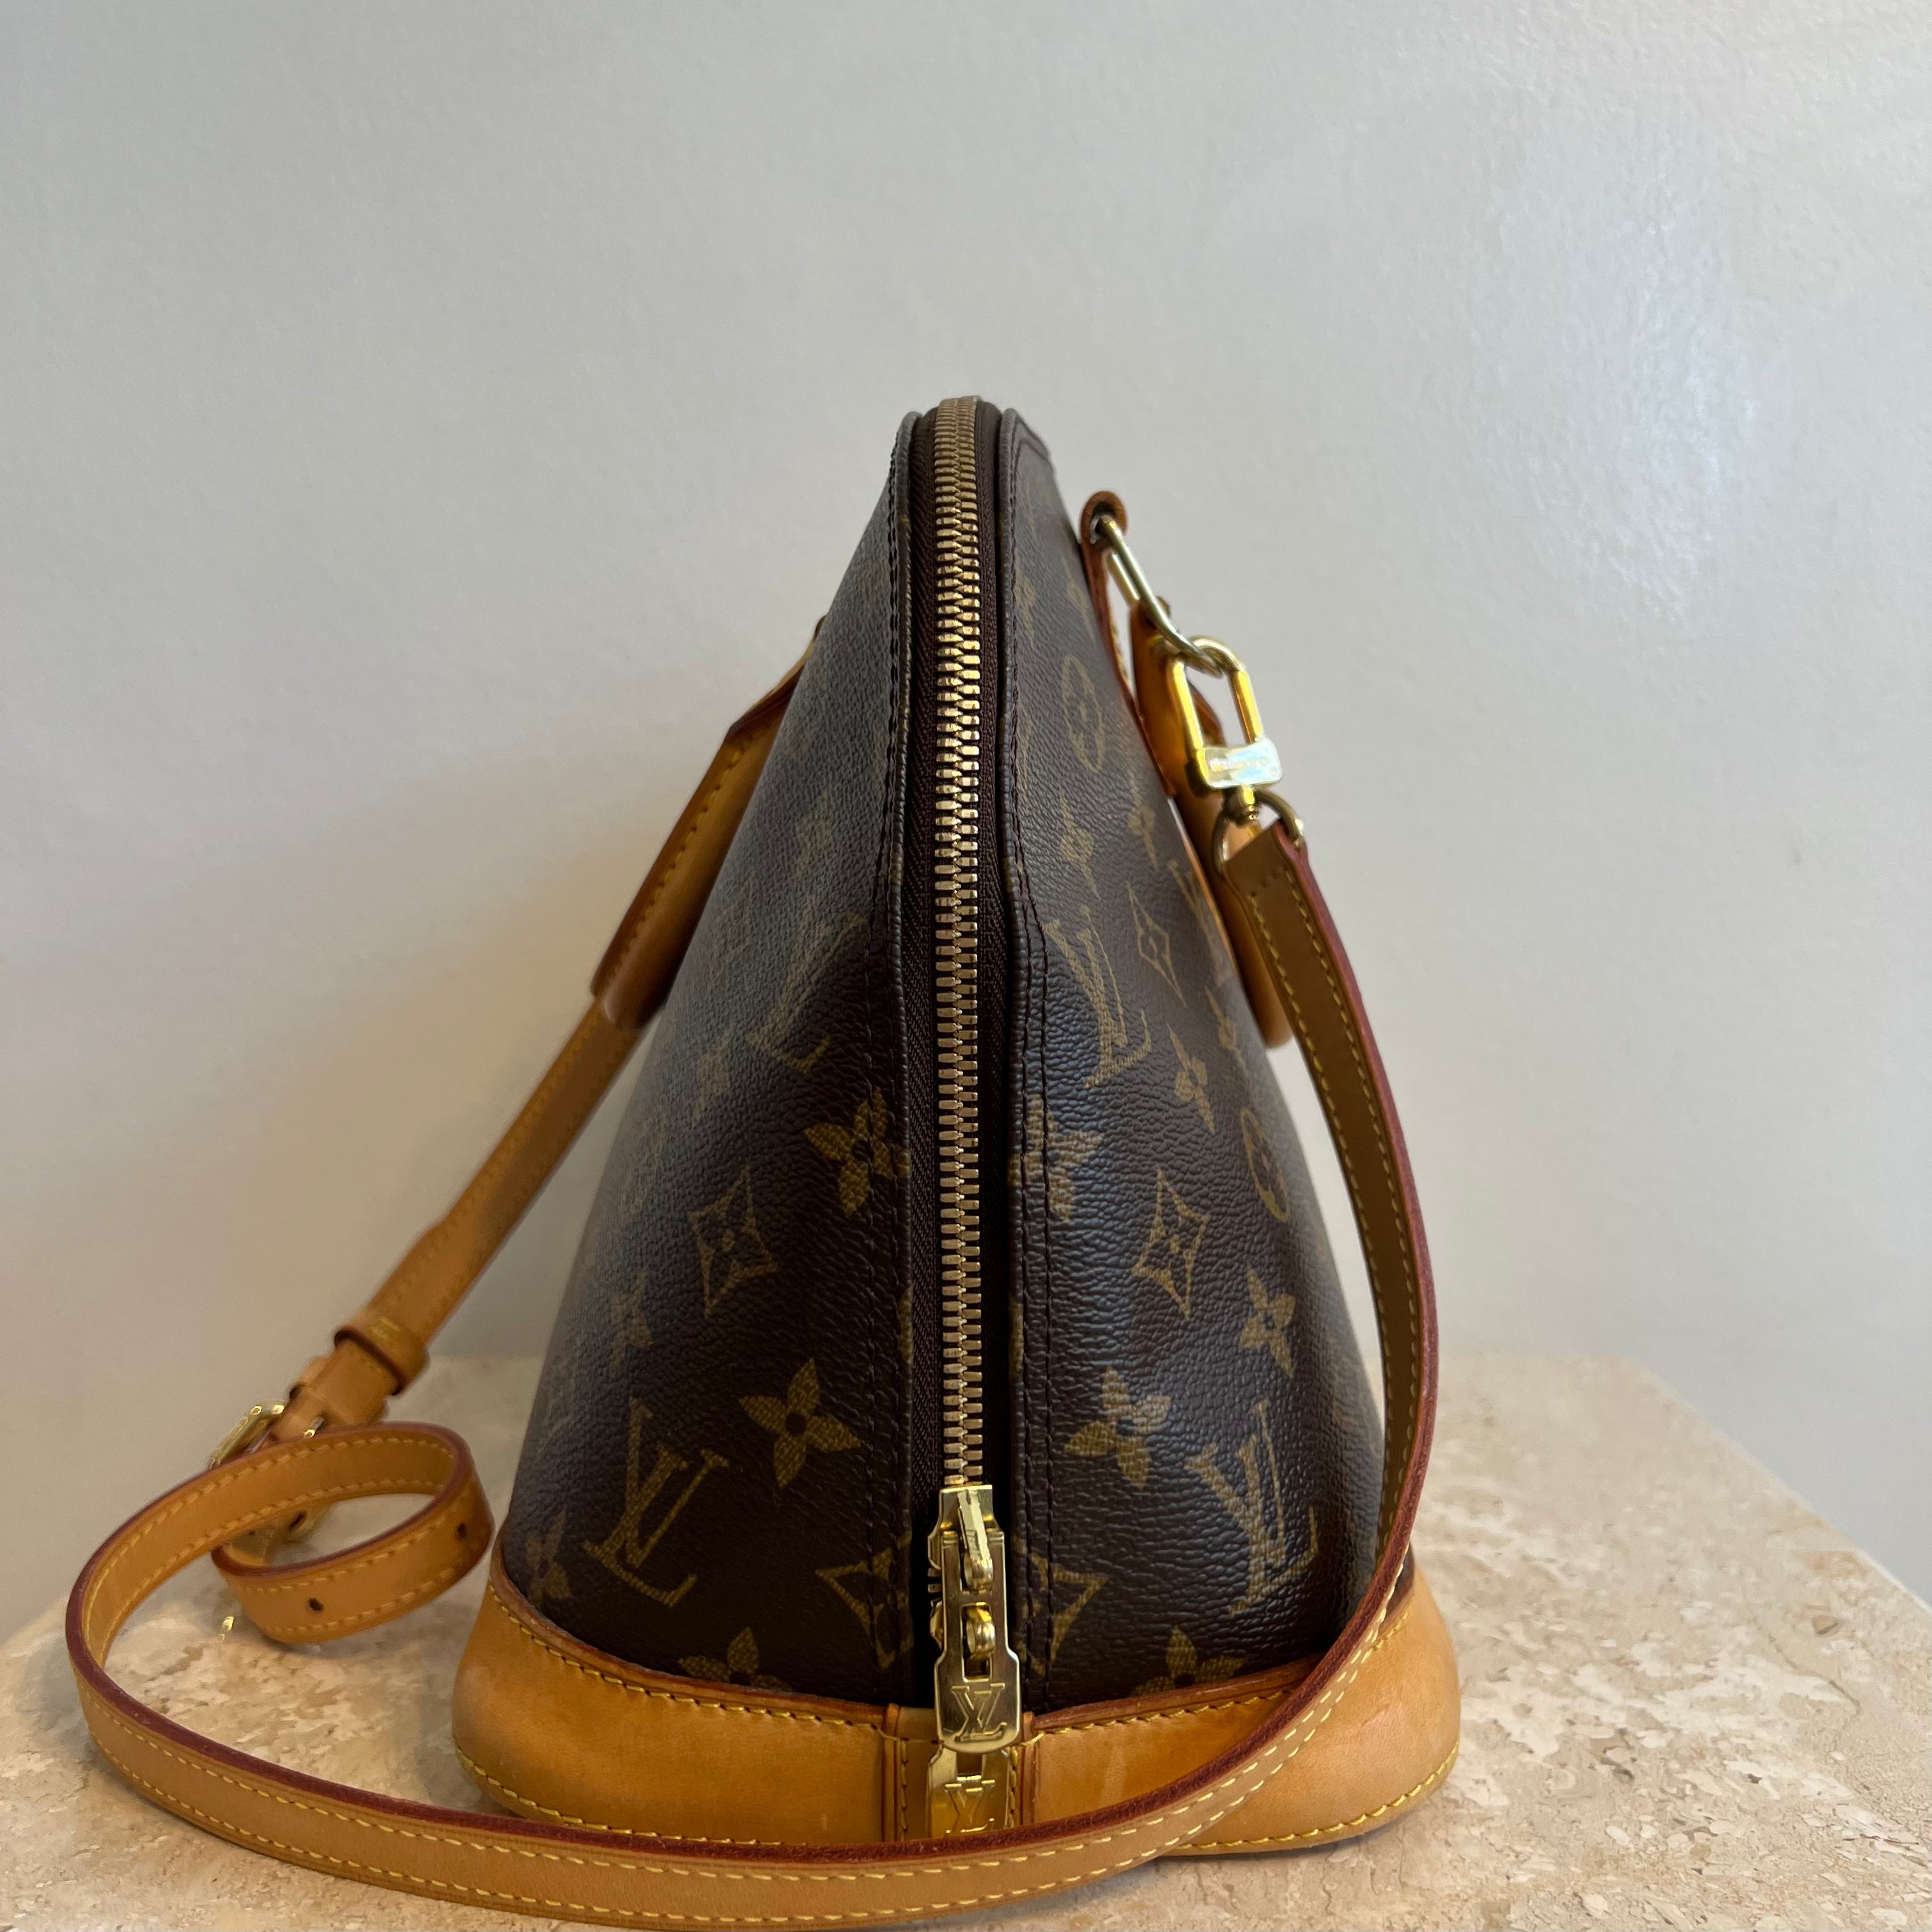 Louis Vuitton Alma Bags  Second Hand, Used & Preowned